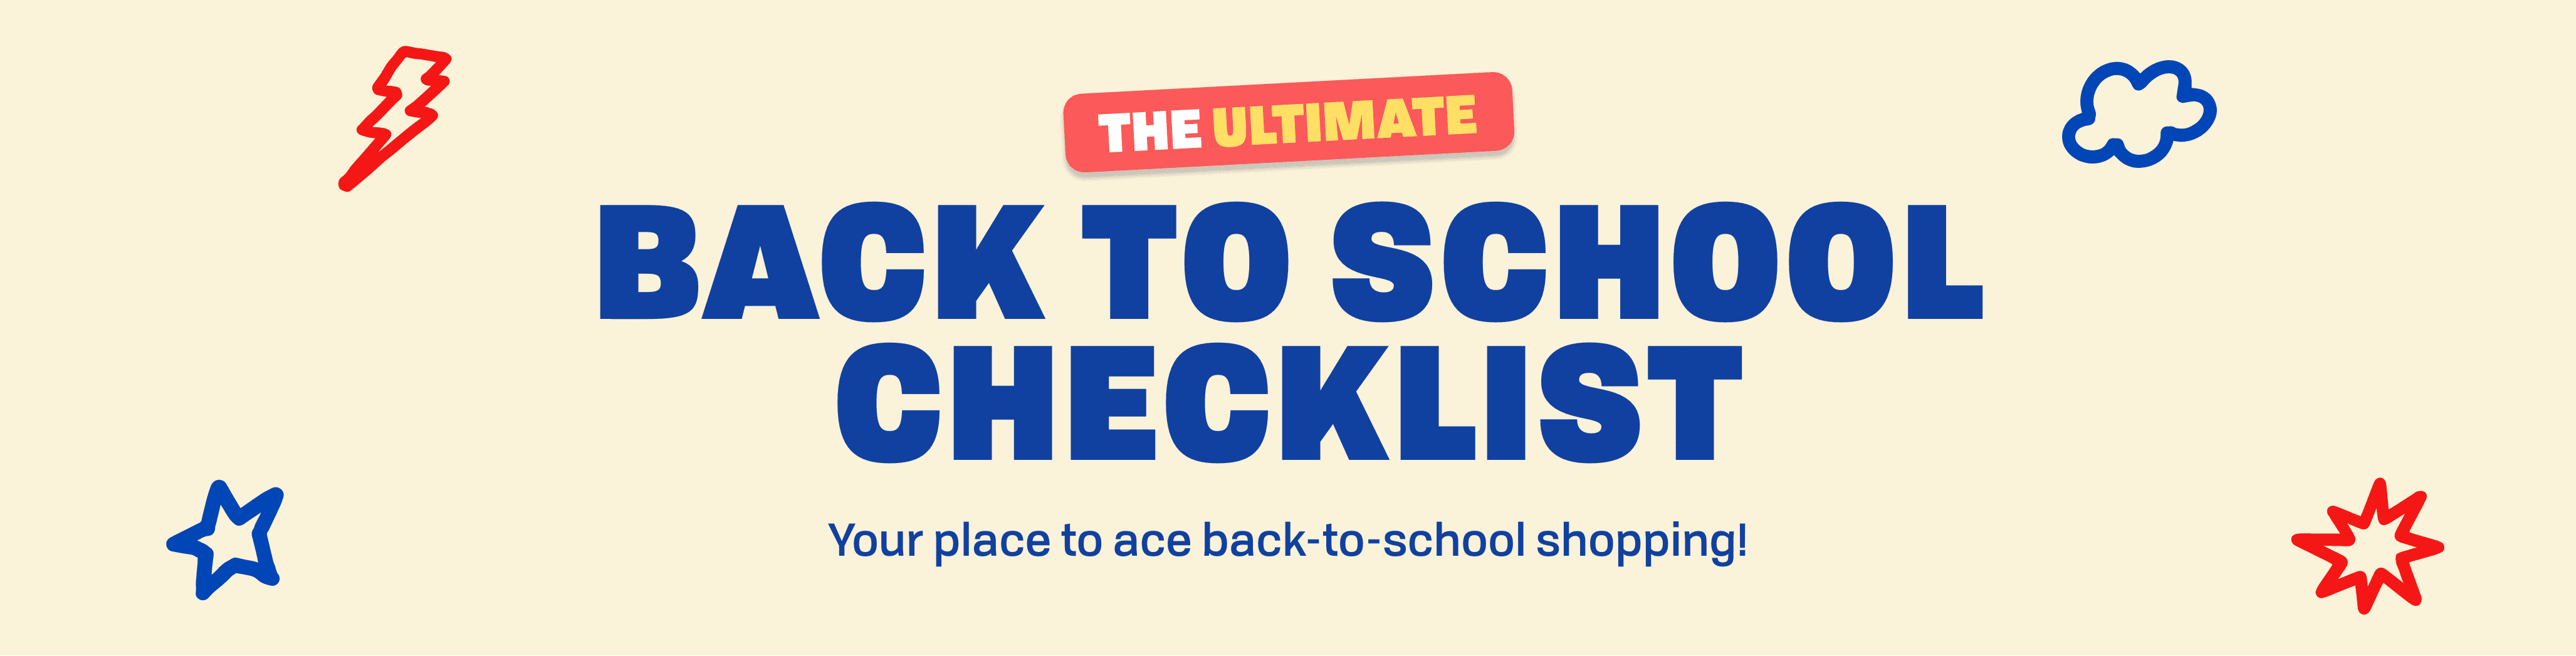 Back To School Checklist: Your place to ace back to school shopping!